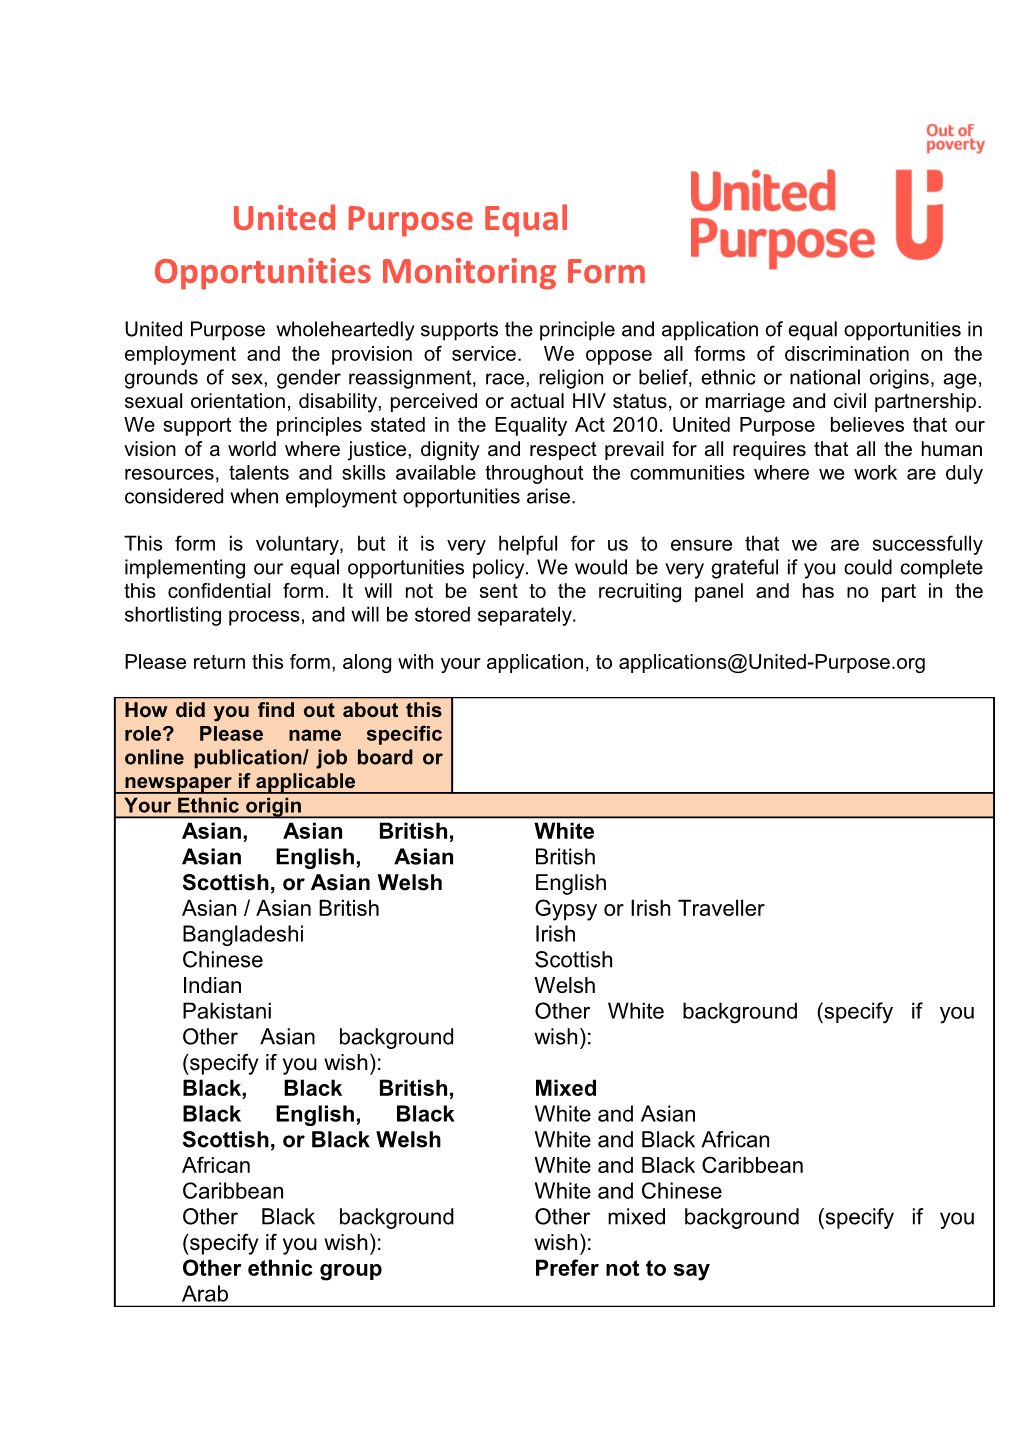 United Purpose Equal Opportunities Monitoring Form